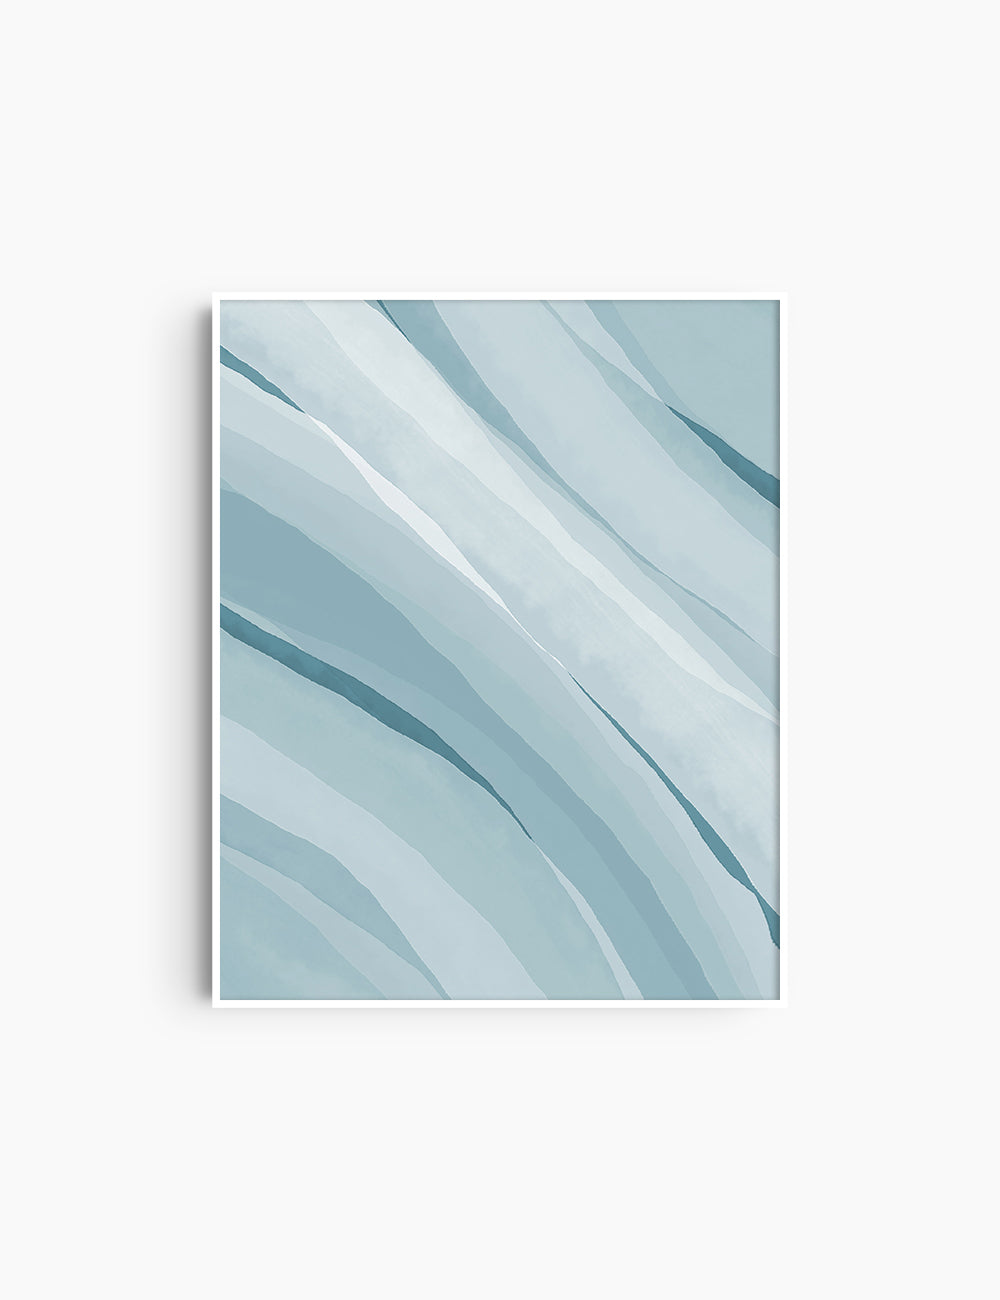 LIGHT BLUE WATERCOLOR ABSTRACT. Aesthetic. Minimalist. Abstract Watercolor Painting. Printable Wall Art. - PAPER MOON Art & Design